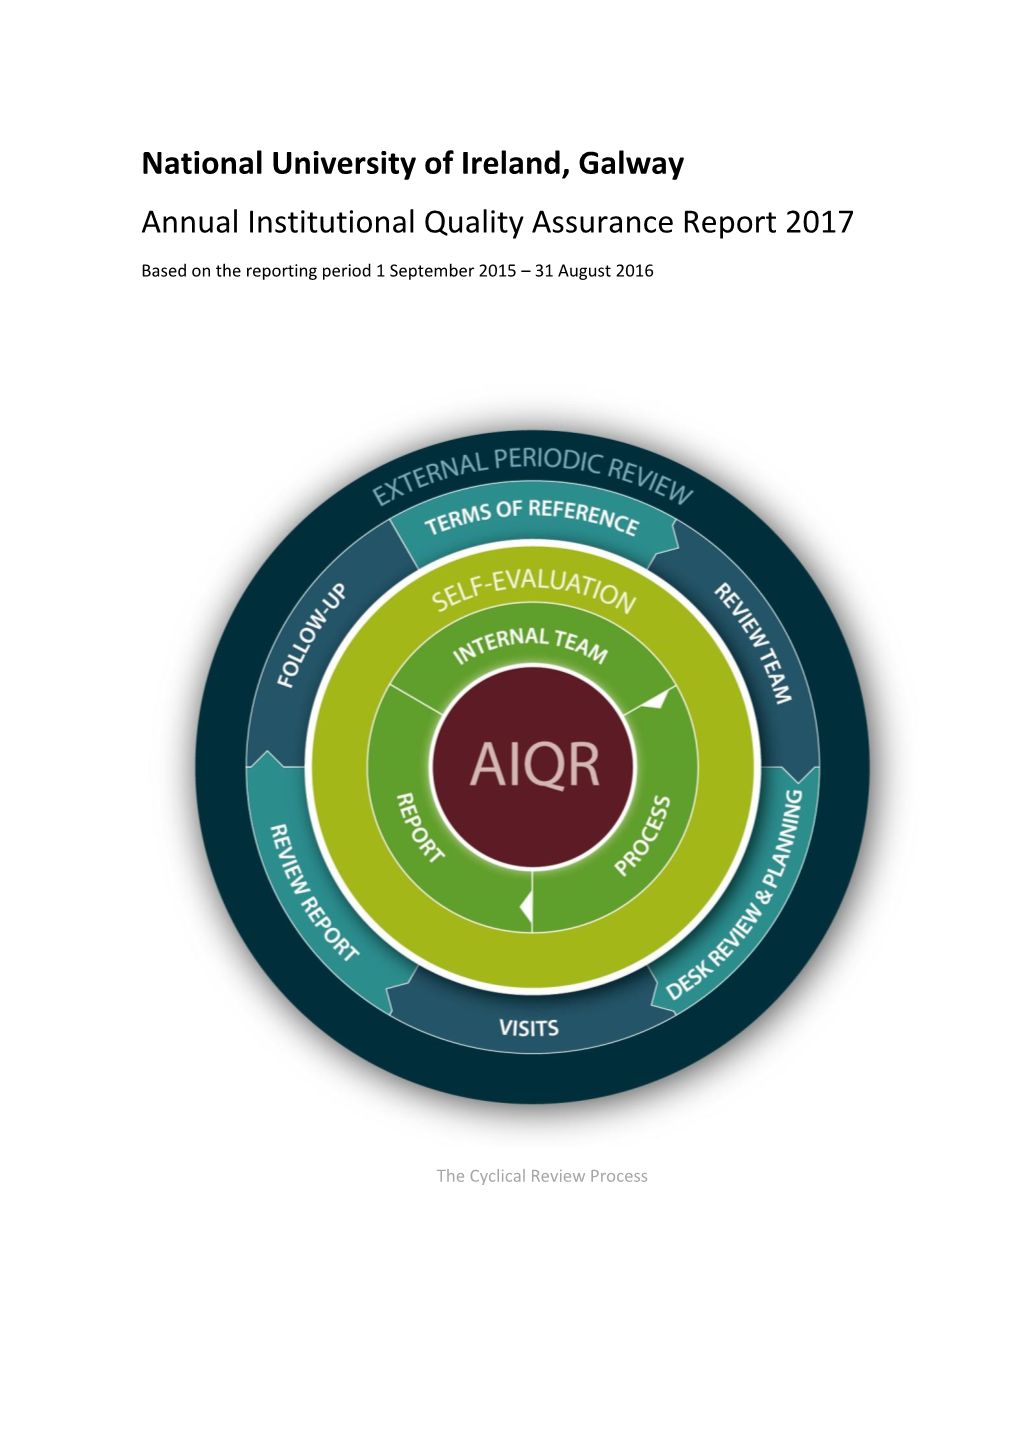 National University of Ireland, Galway Annual Institutional Quality Assurance Report 2017